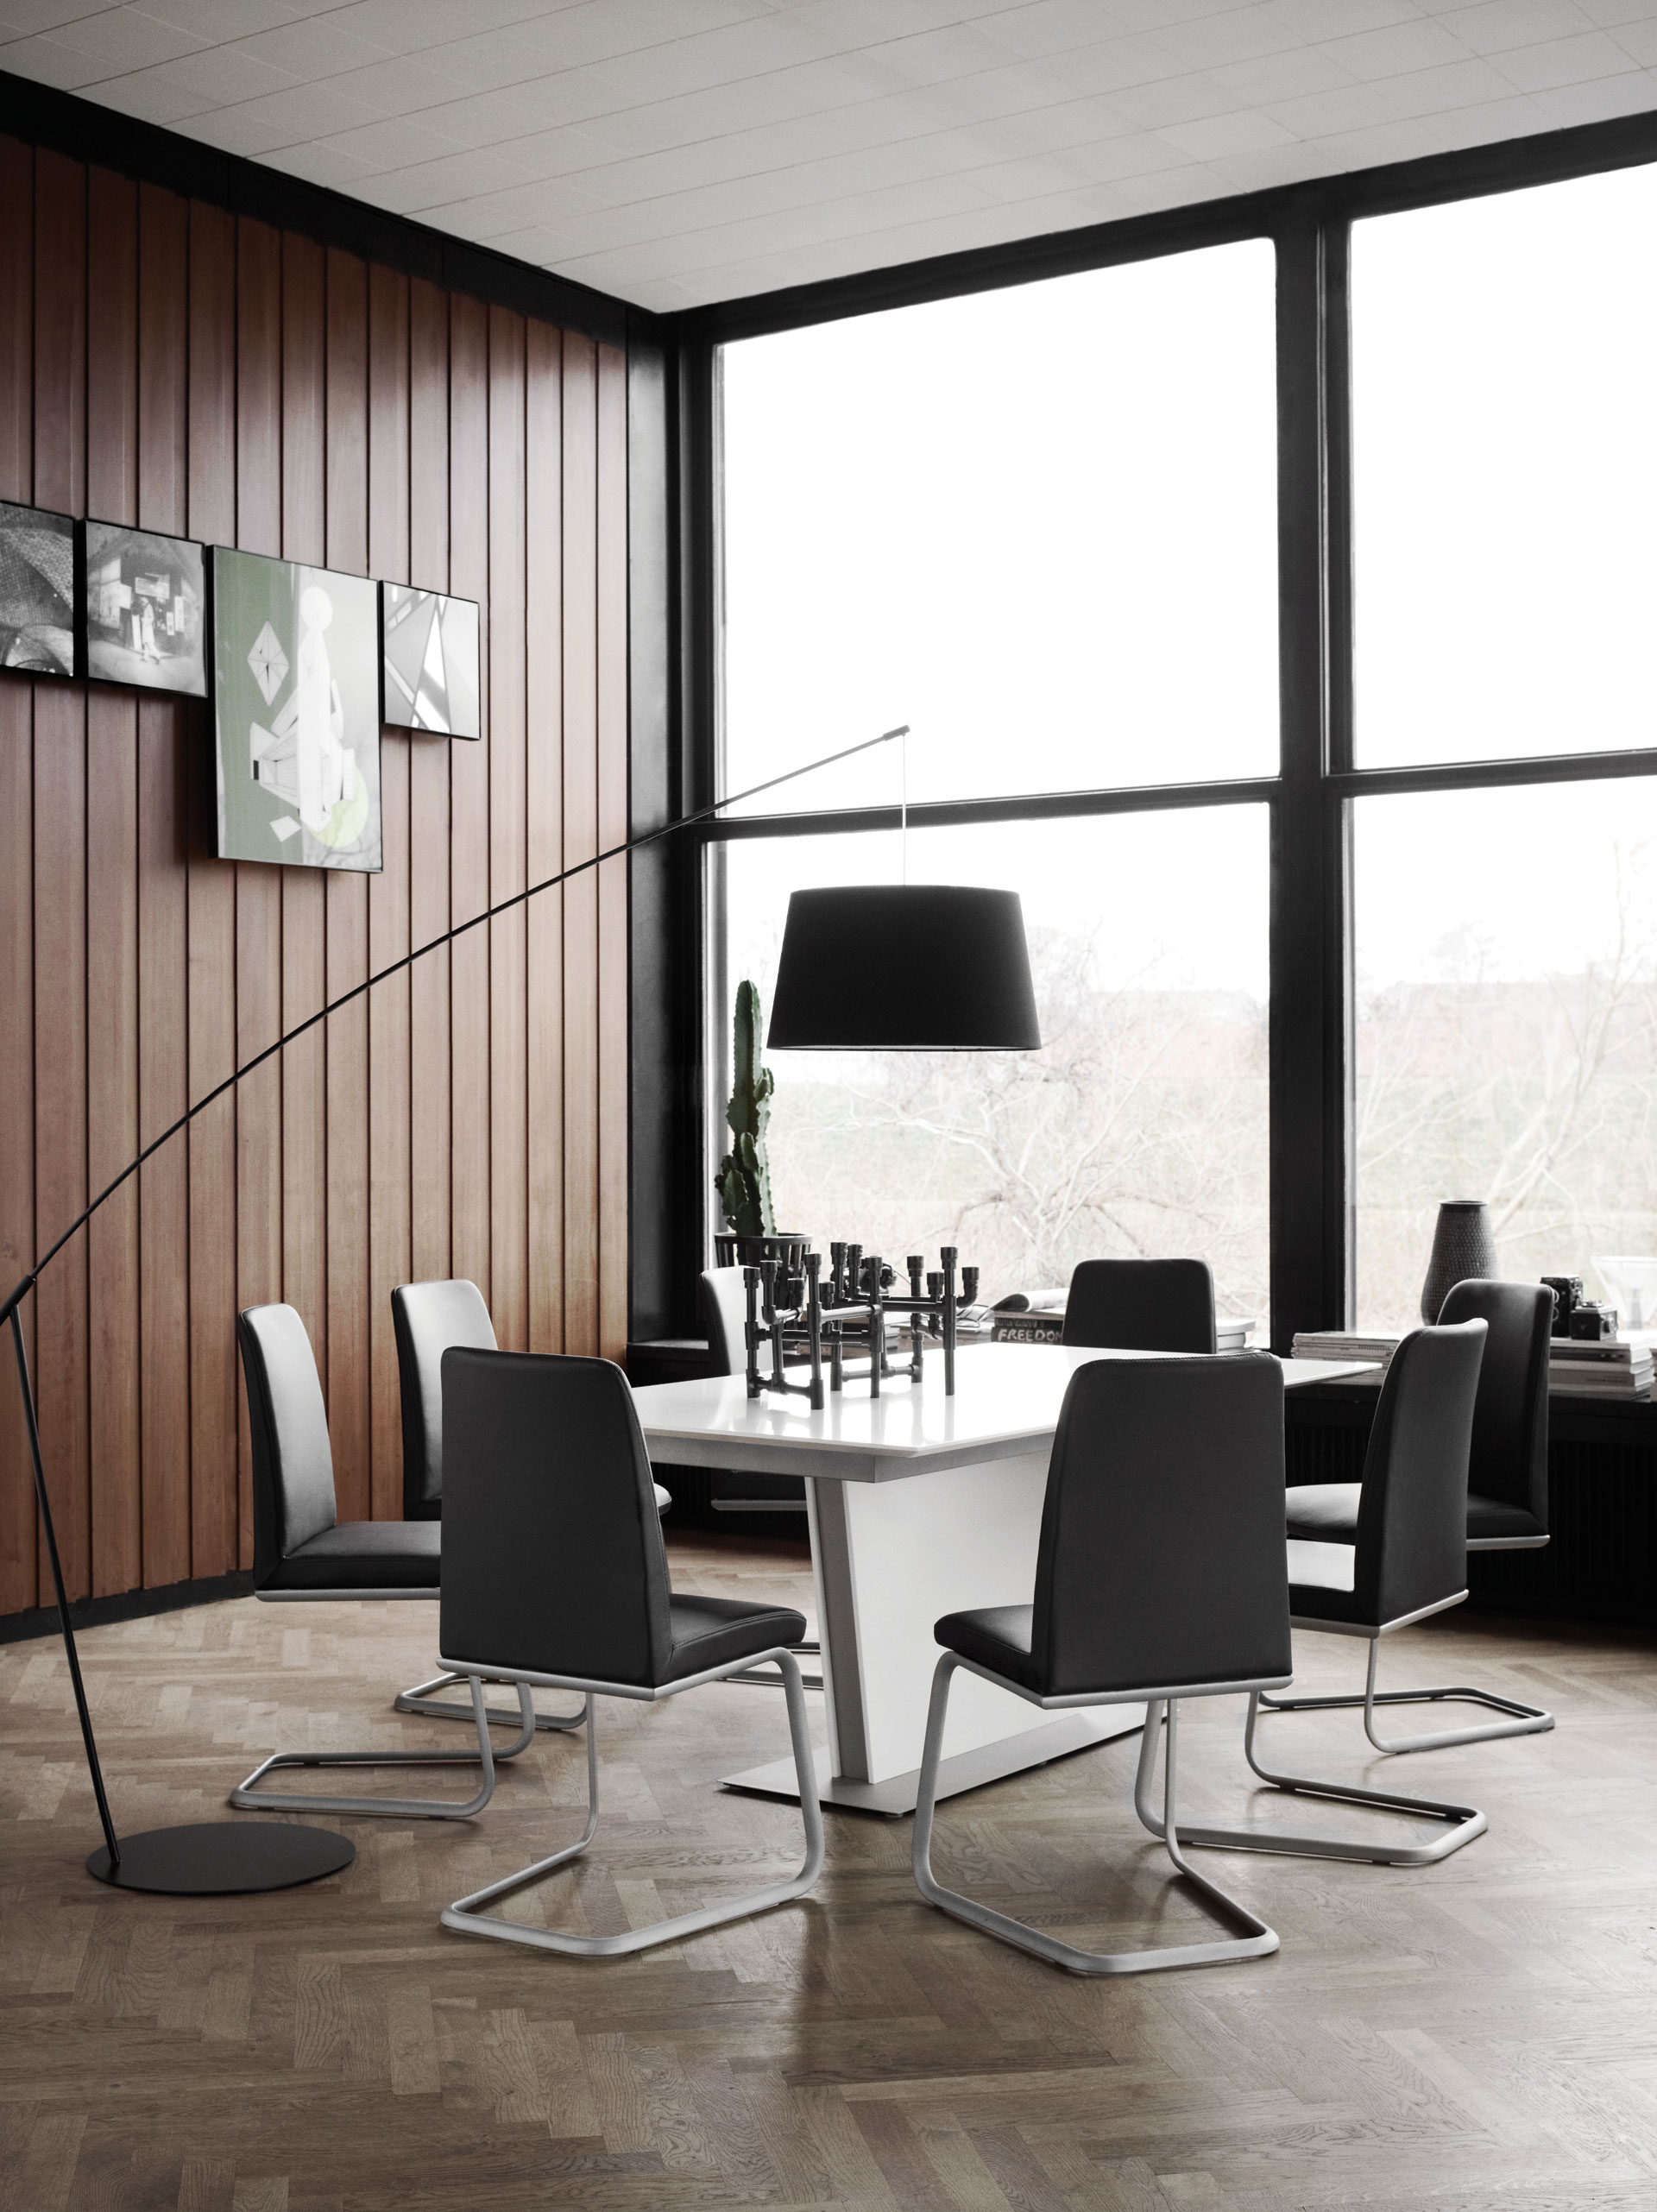 How to Use Modern Floor Lamps in Your Dining Room Lighting Design (4)